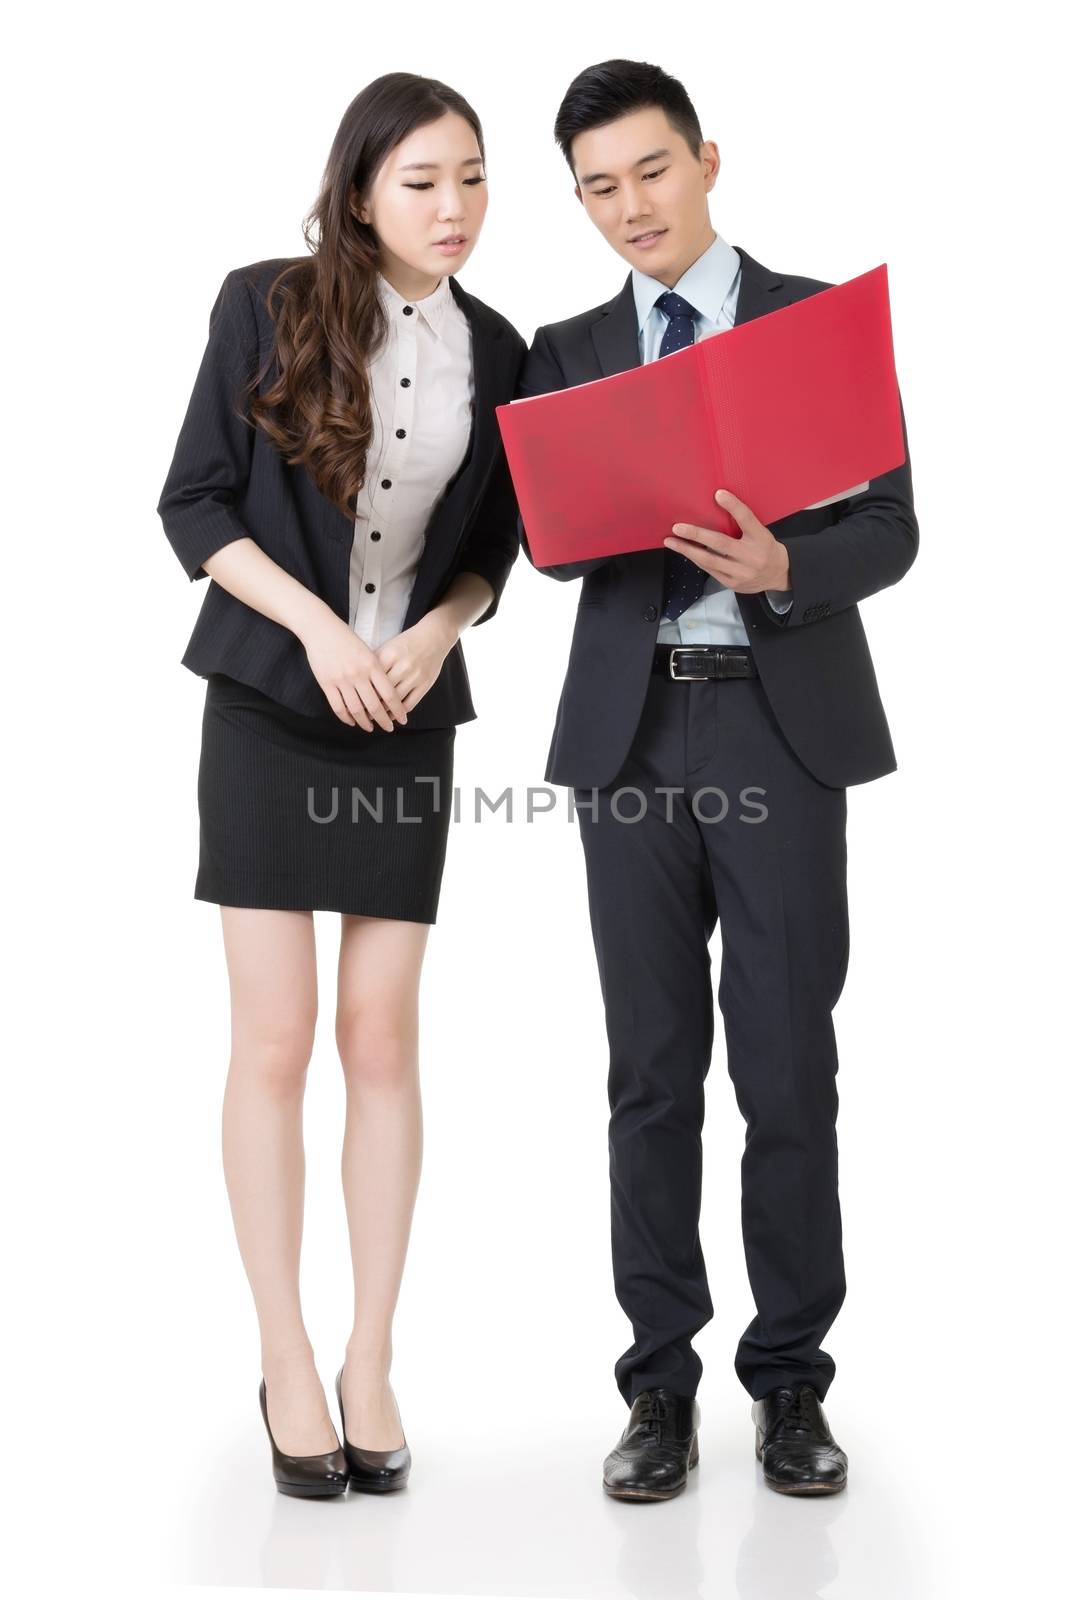 Business man and woman discuss, full length portrait isolated on white background.